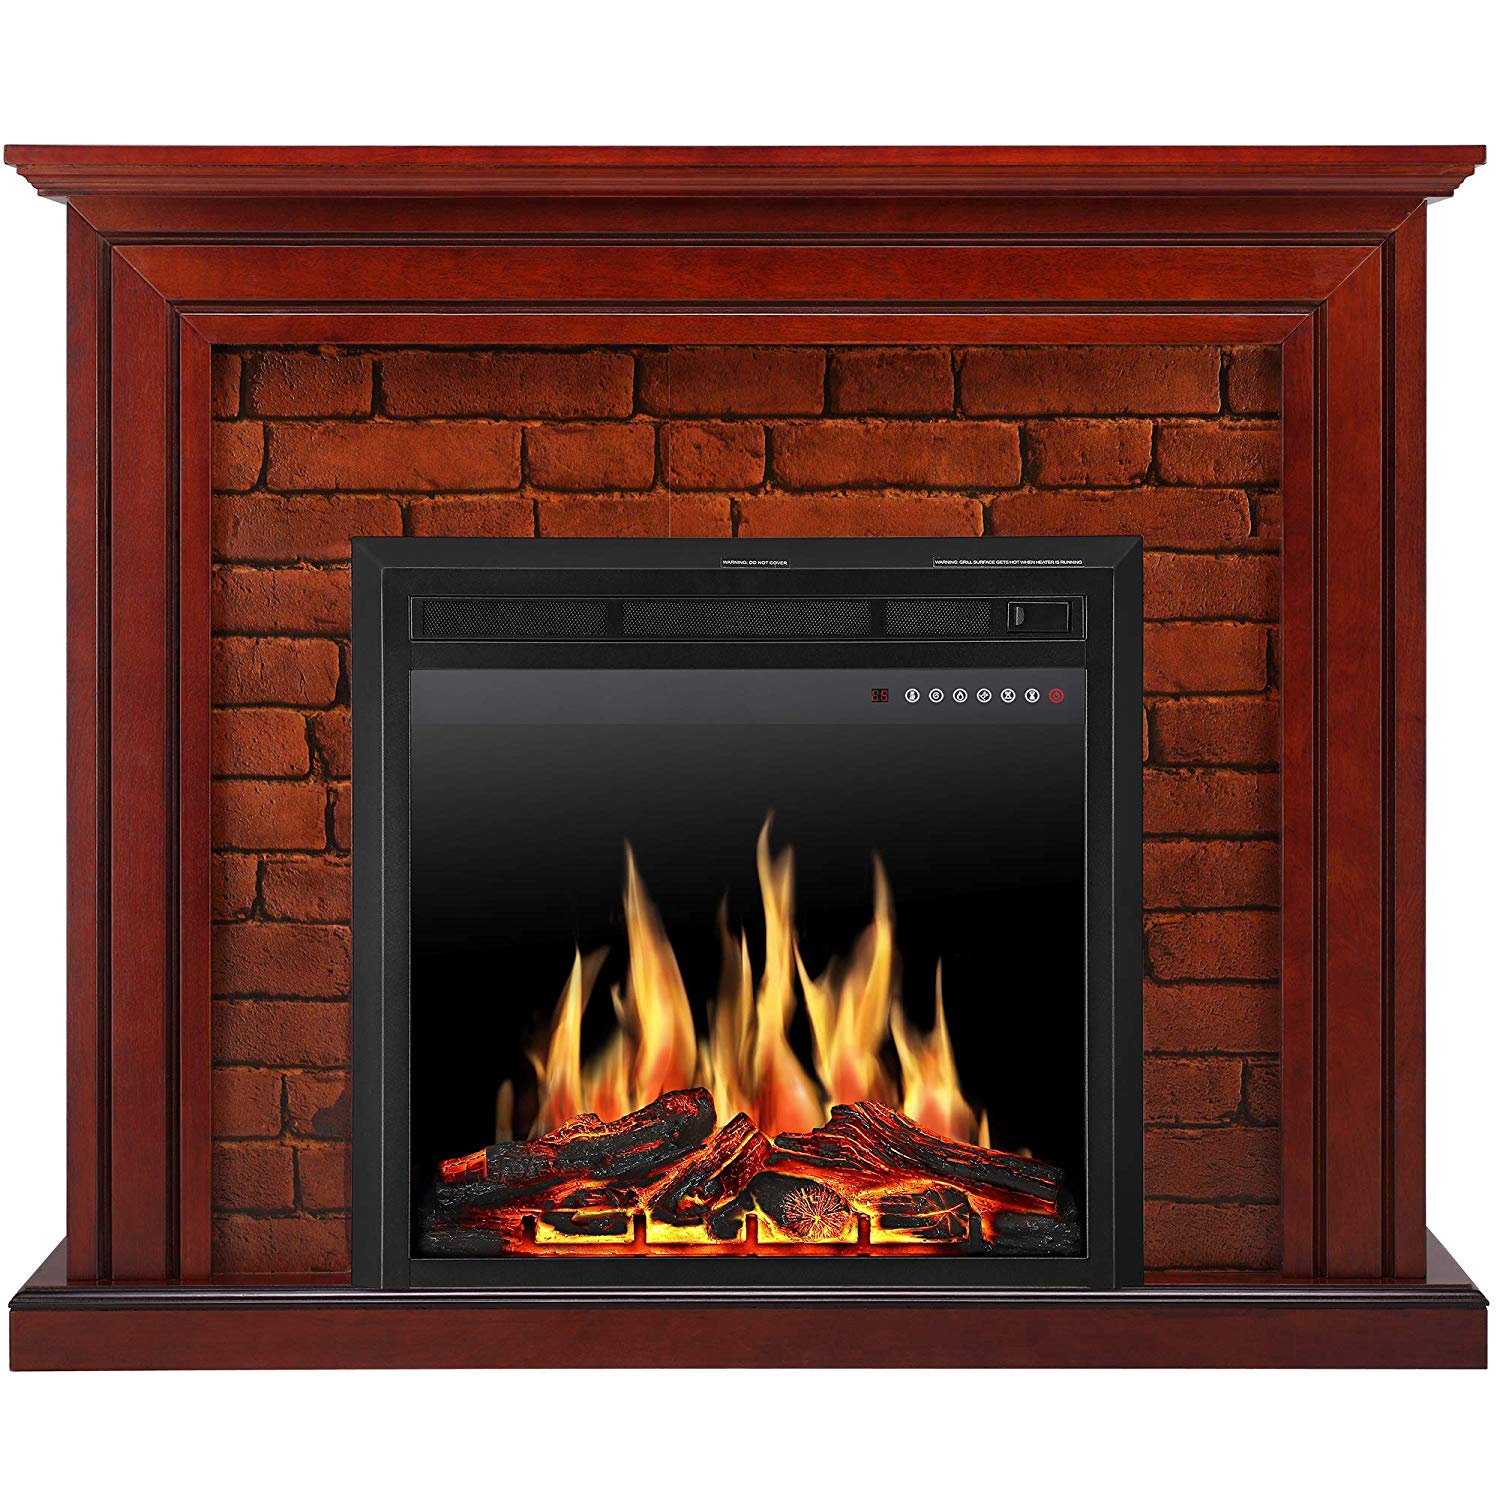 Whalen Fireplace Tv Stand Inspirational Jamfly Electric Fireplace Mantel Package Traditional Brick Wall Design Heater with Remote Control and Led touch Screen Home Accent Furnishings